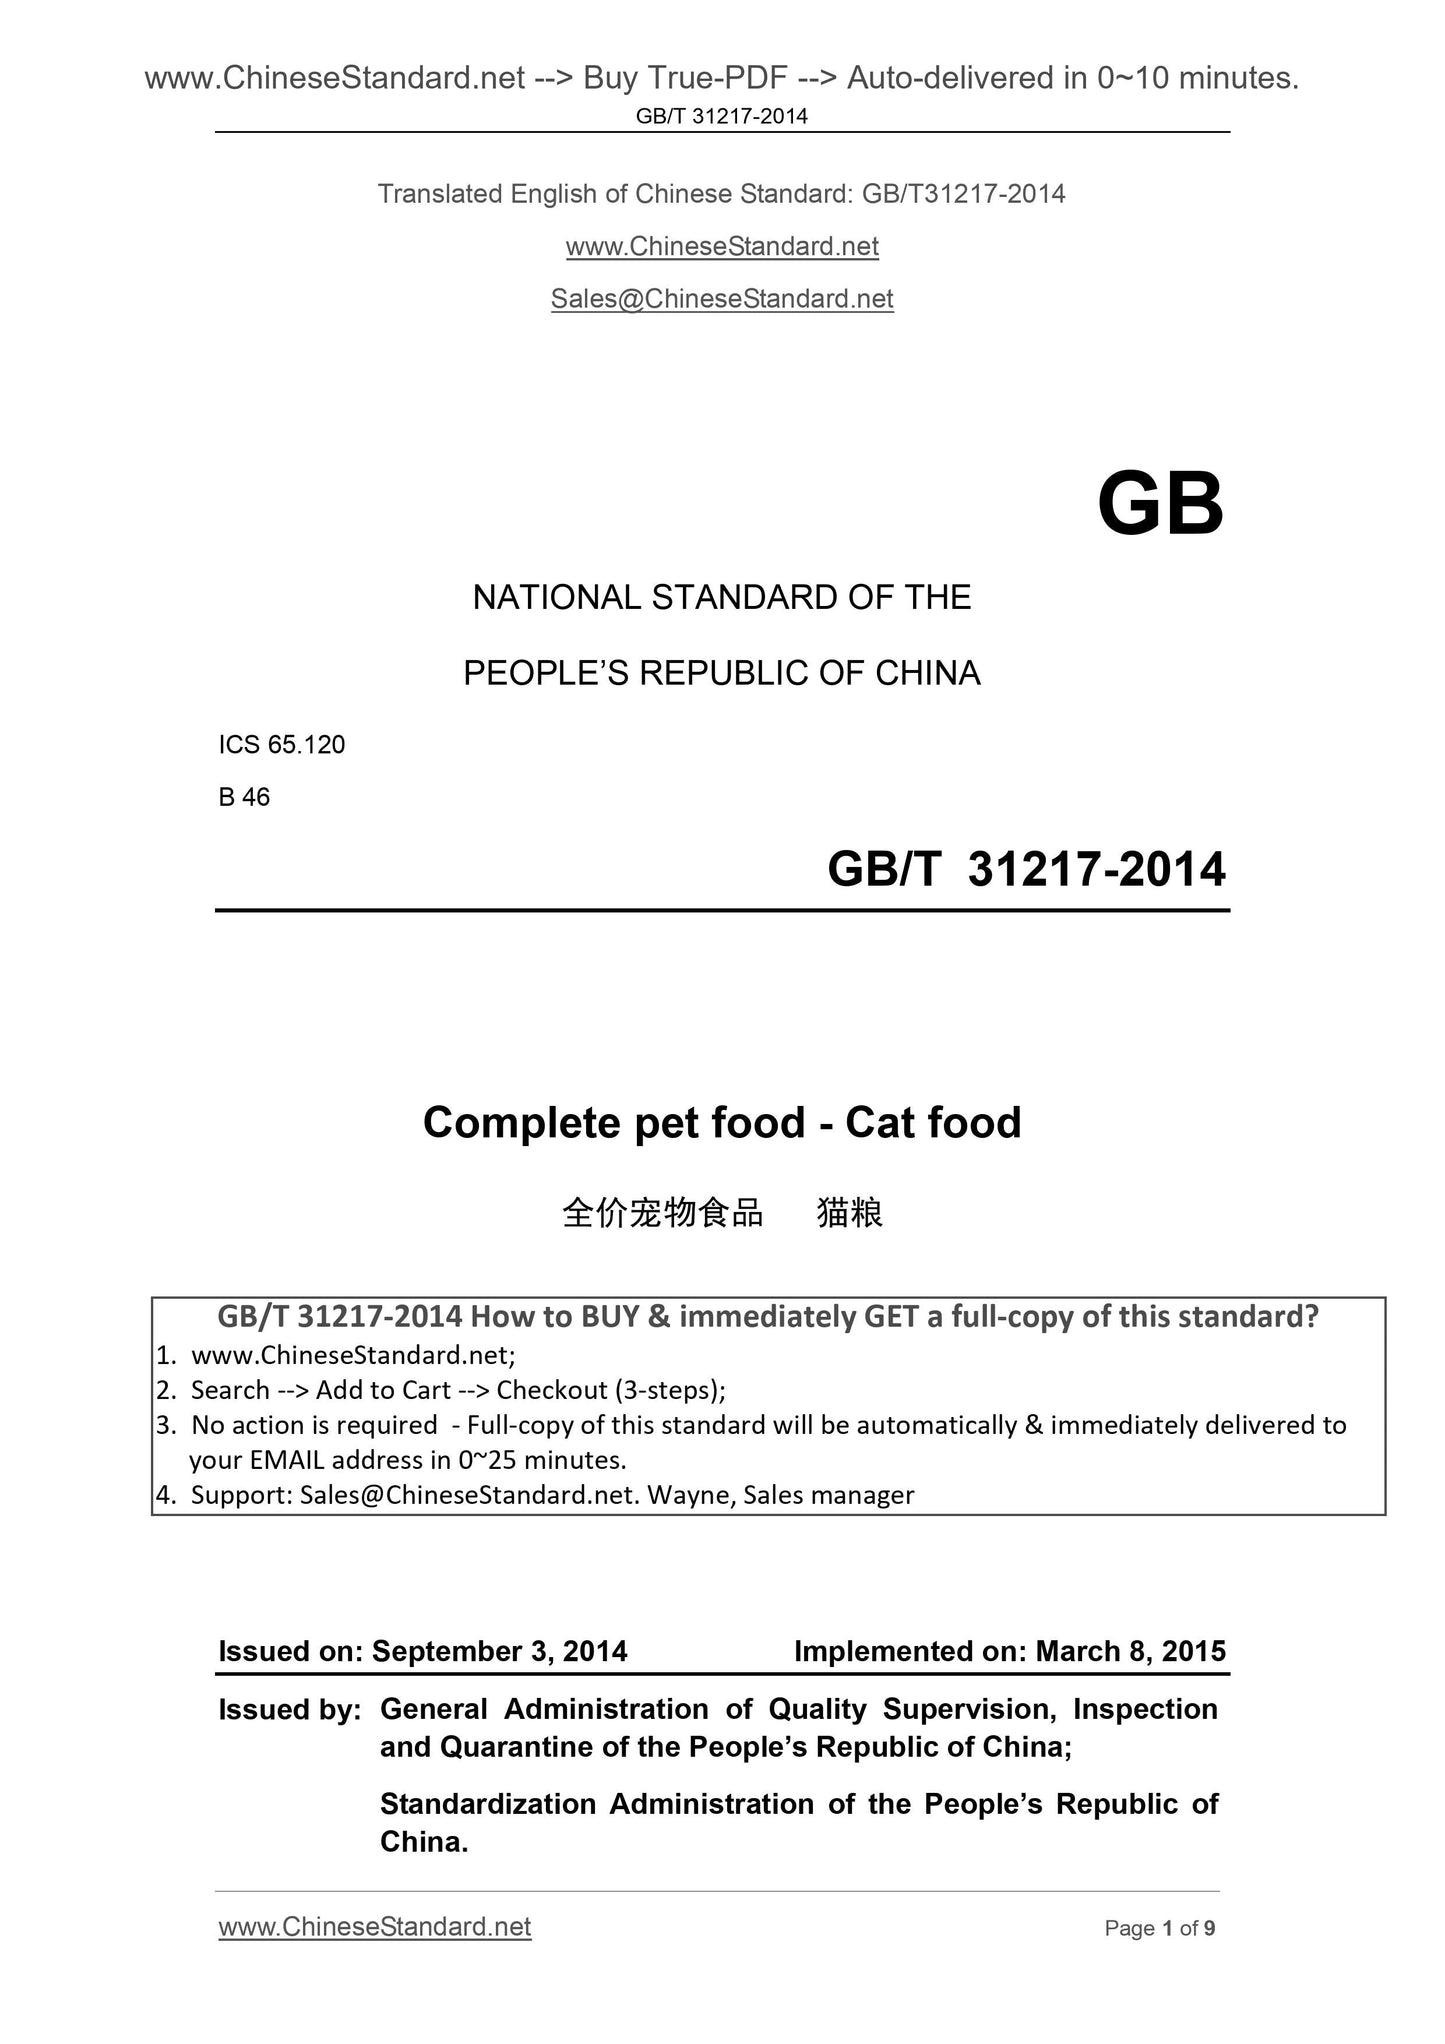 GB/T 31217-2014 Page 1